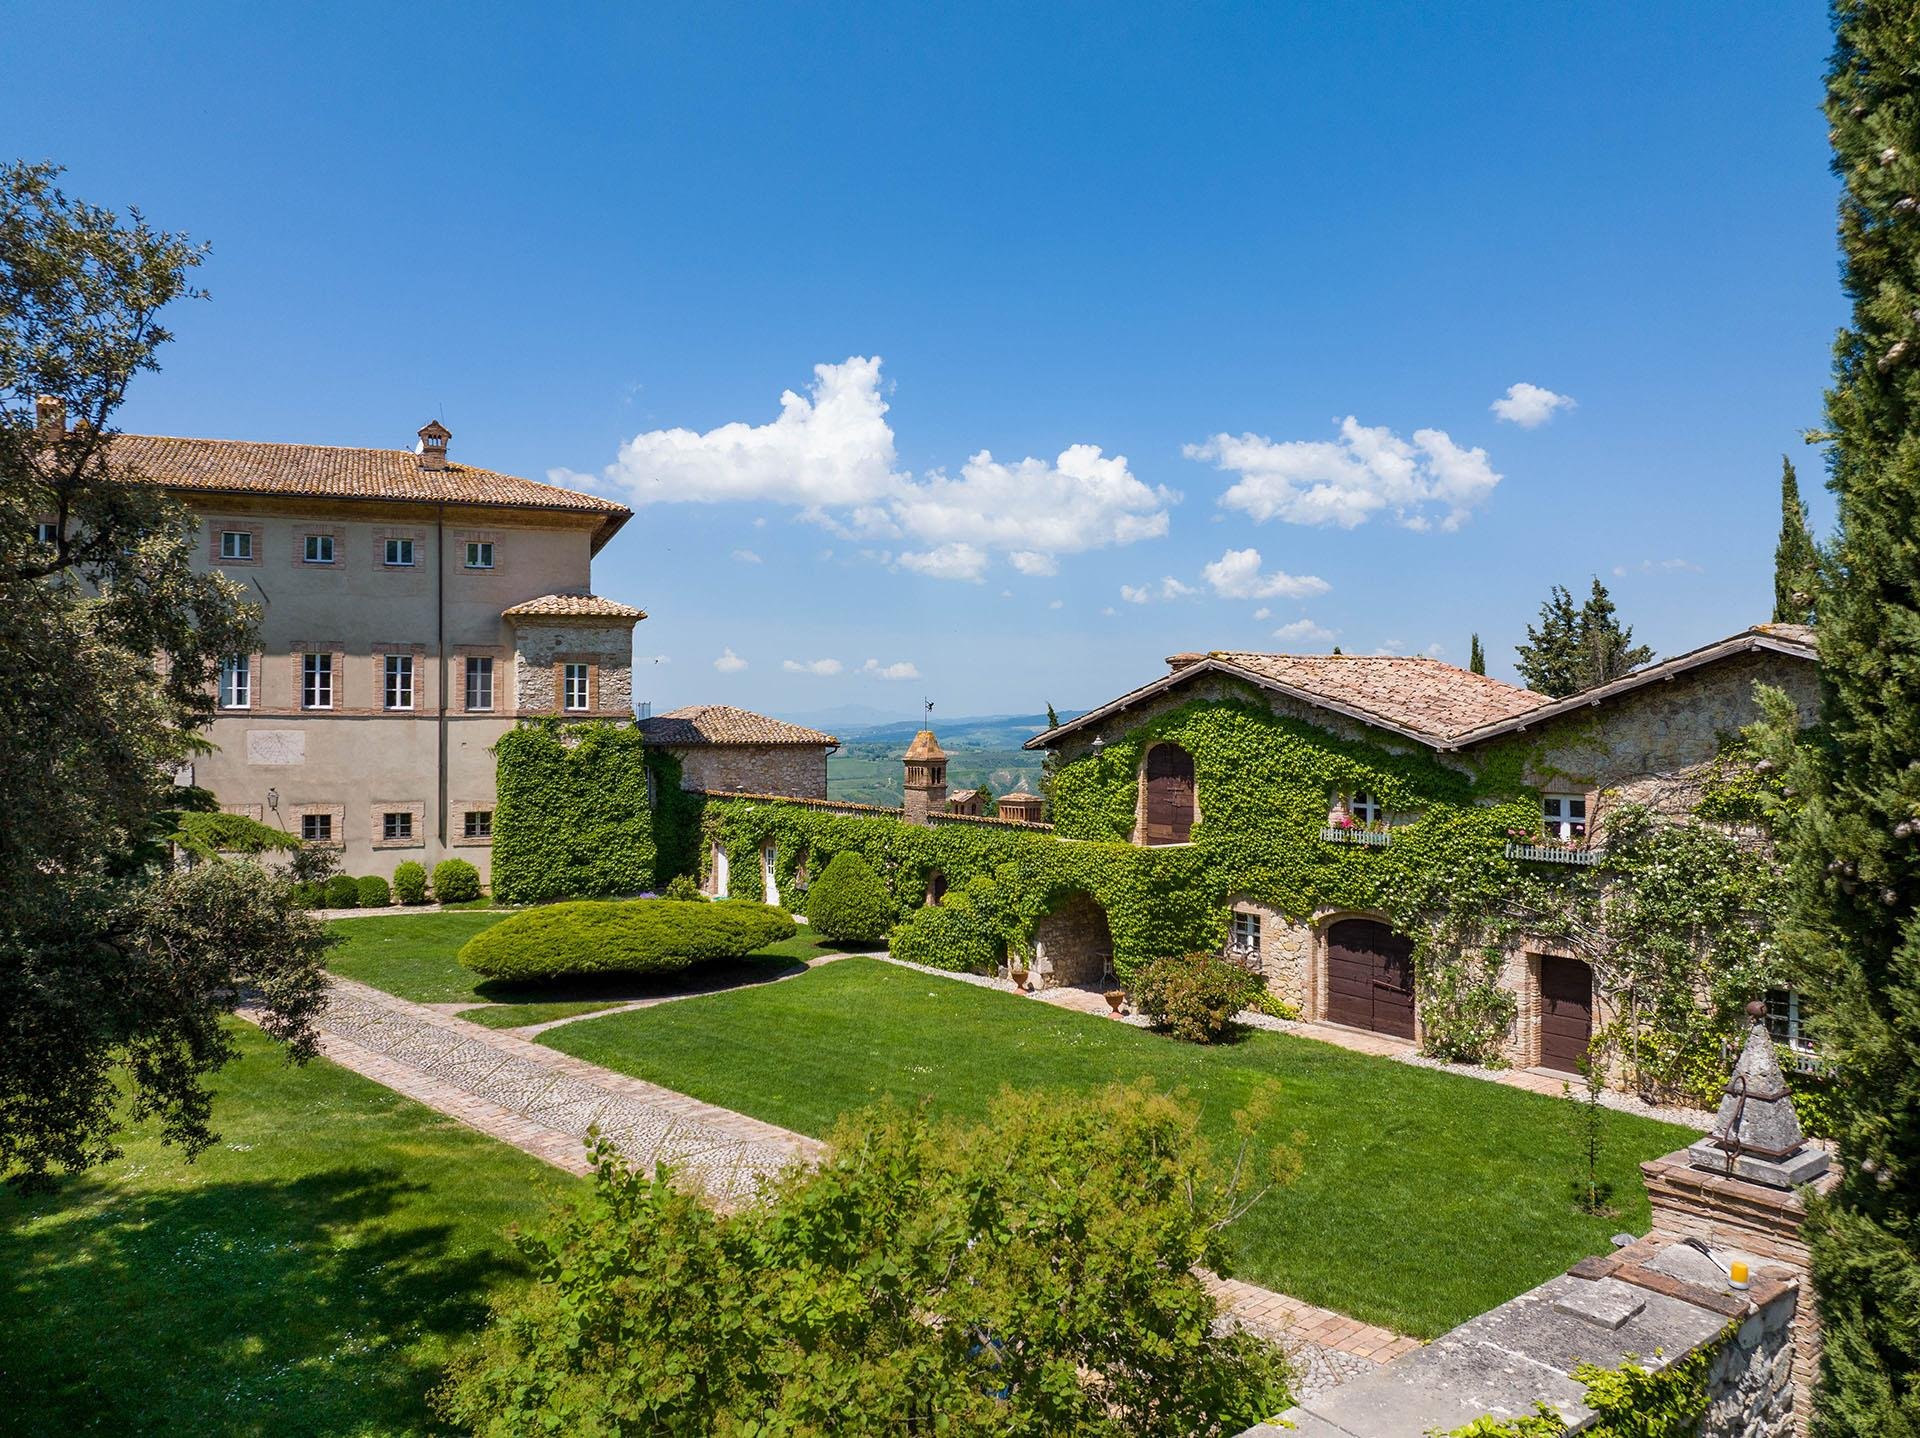 Francis York Historic Palazzo For Sale in Umbria, Italy Set in Private Park 1.jpg